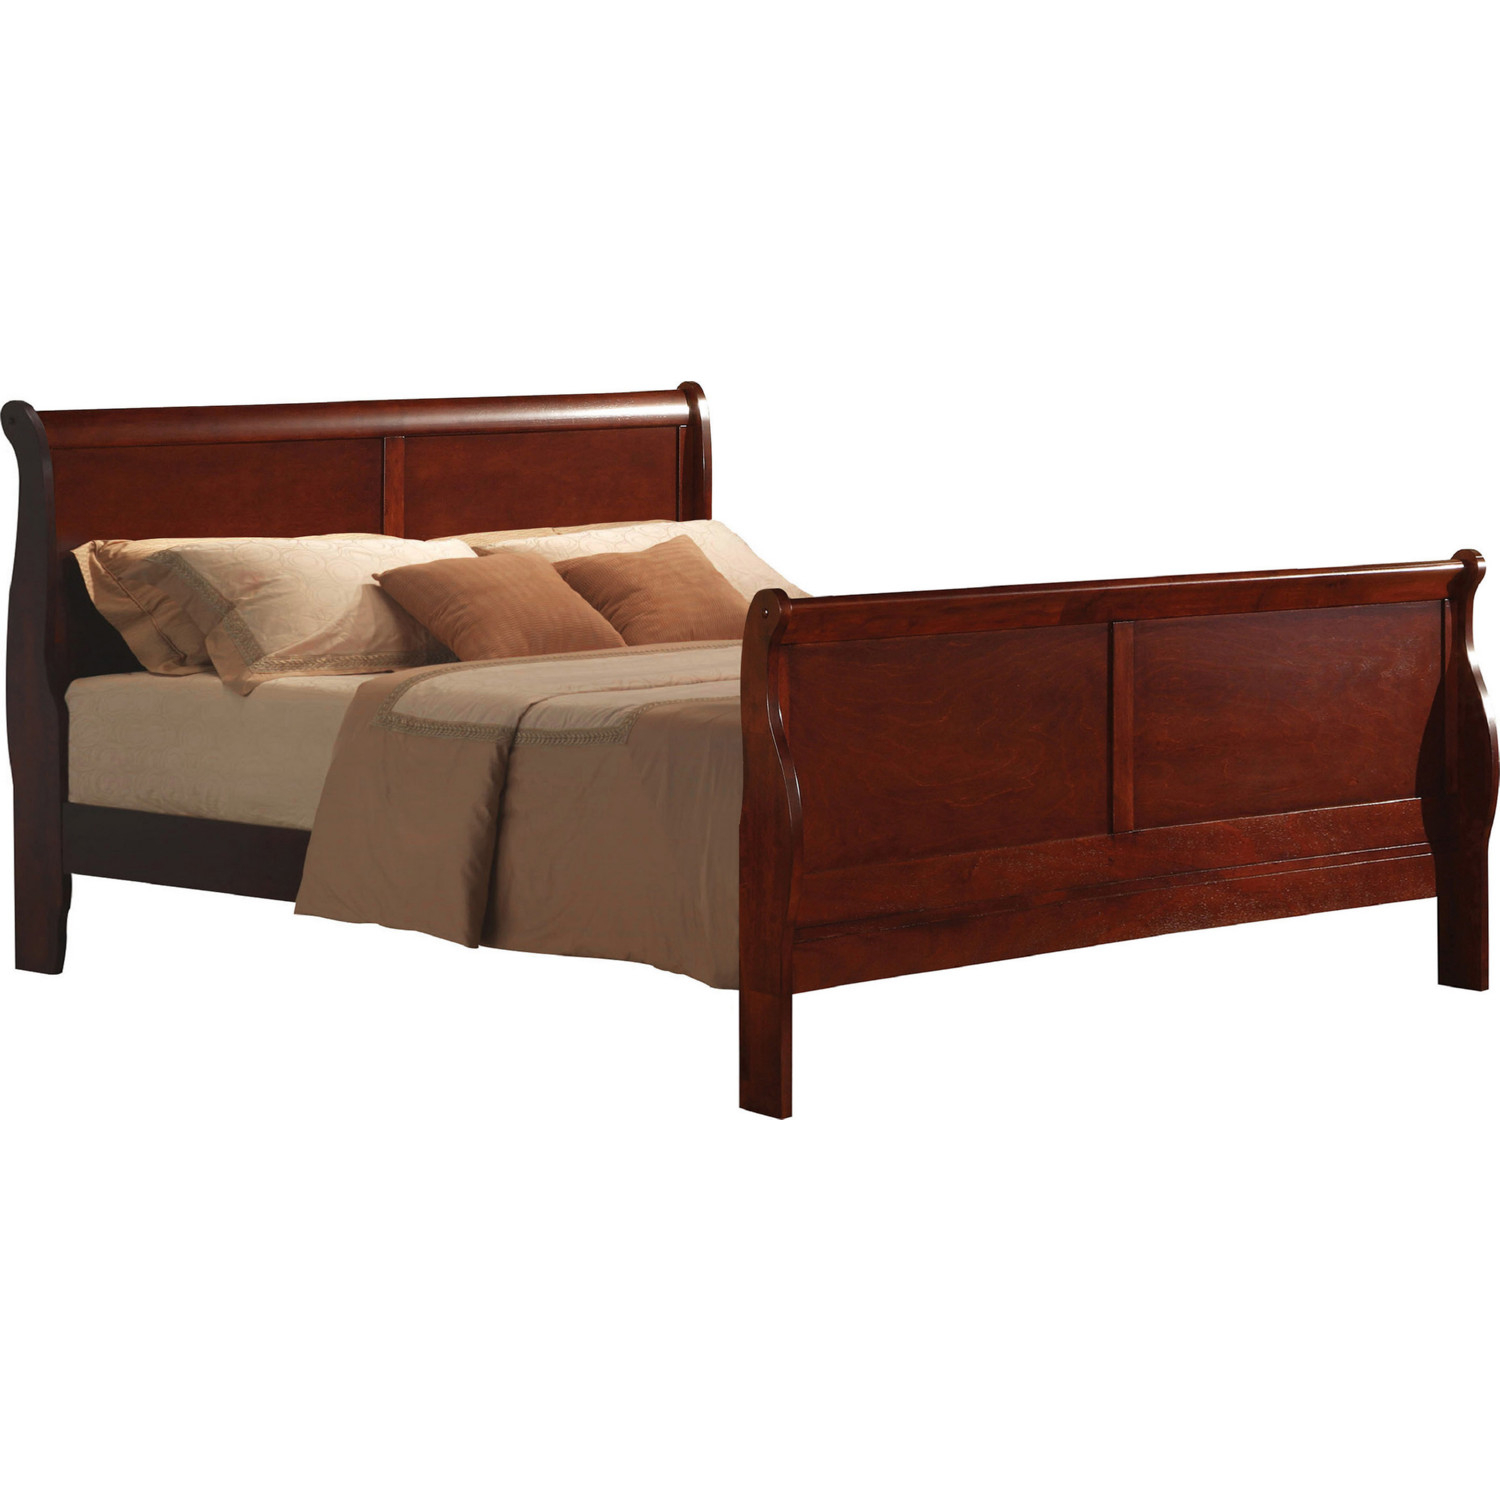 Acme Louis Philippe III Bed - Cherry 19520Q-Bed at